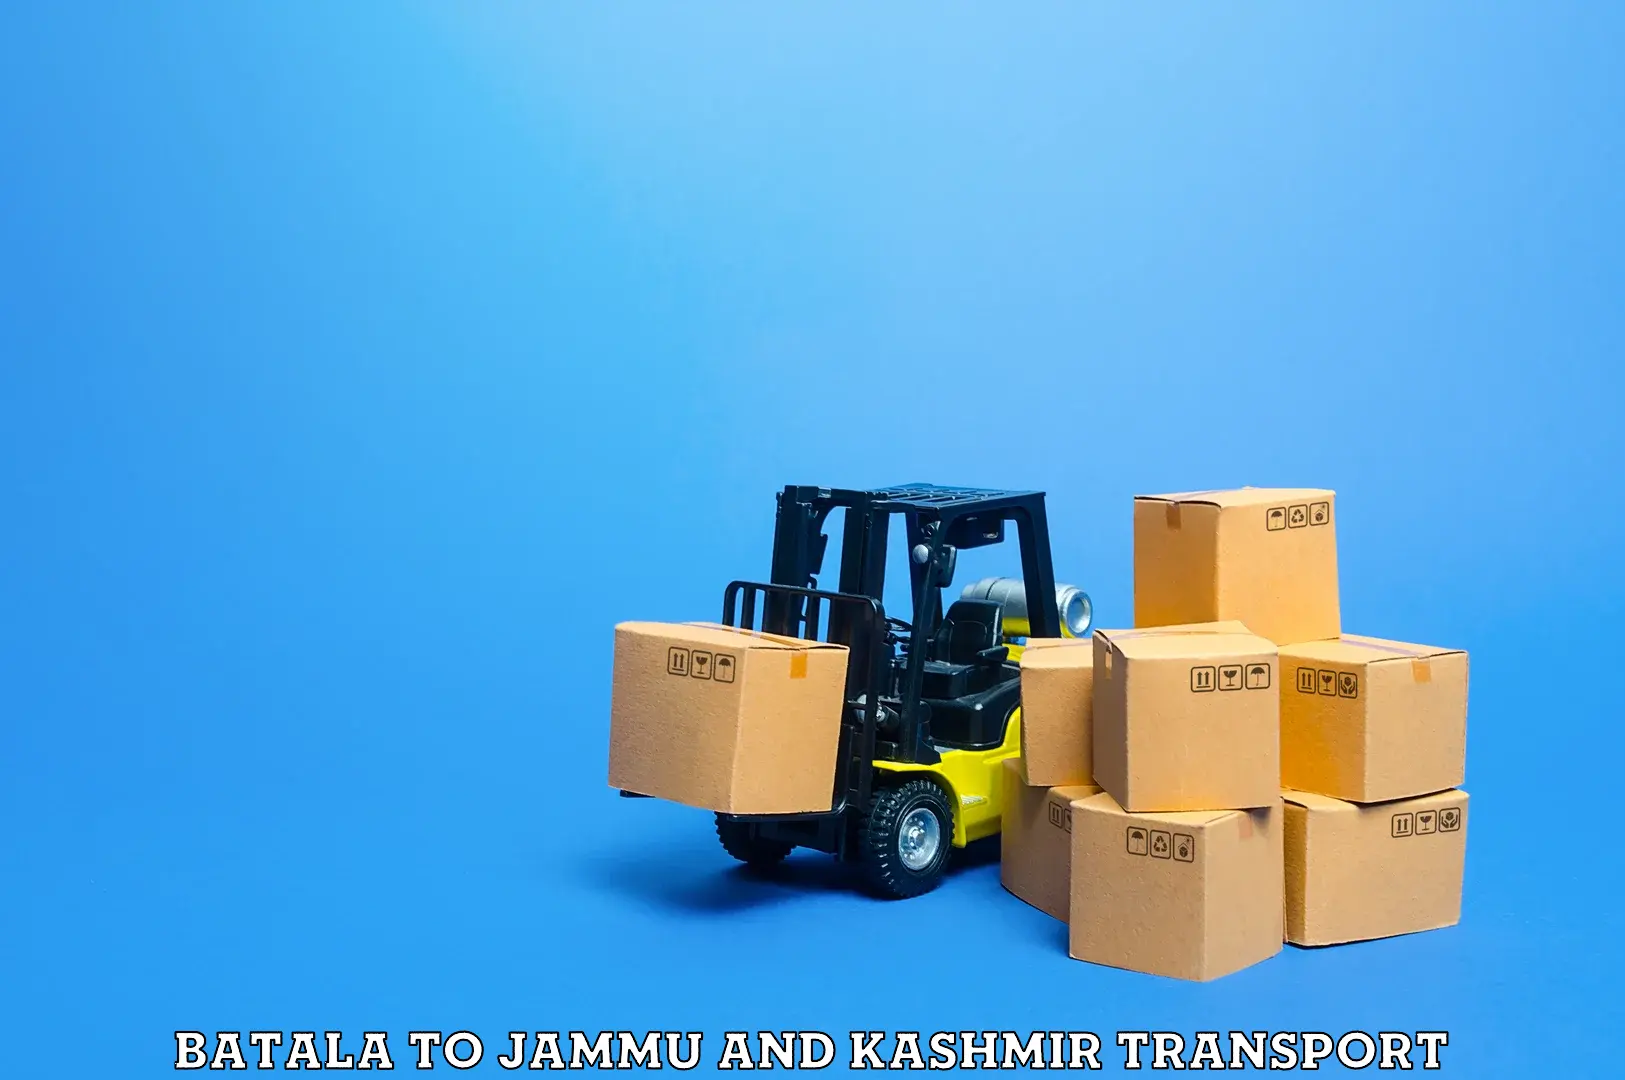 Truck transport companies in India Batala to Udhampur